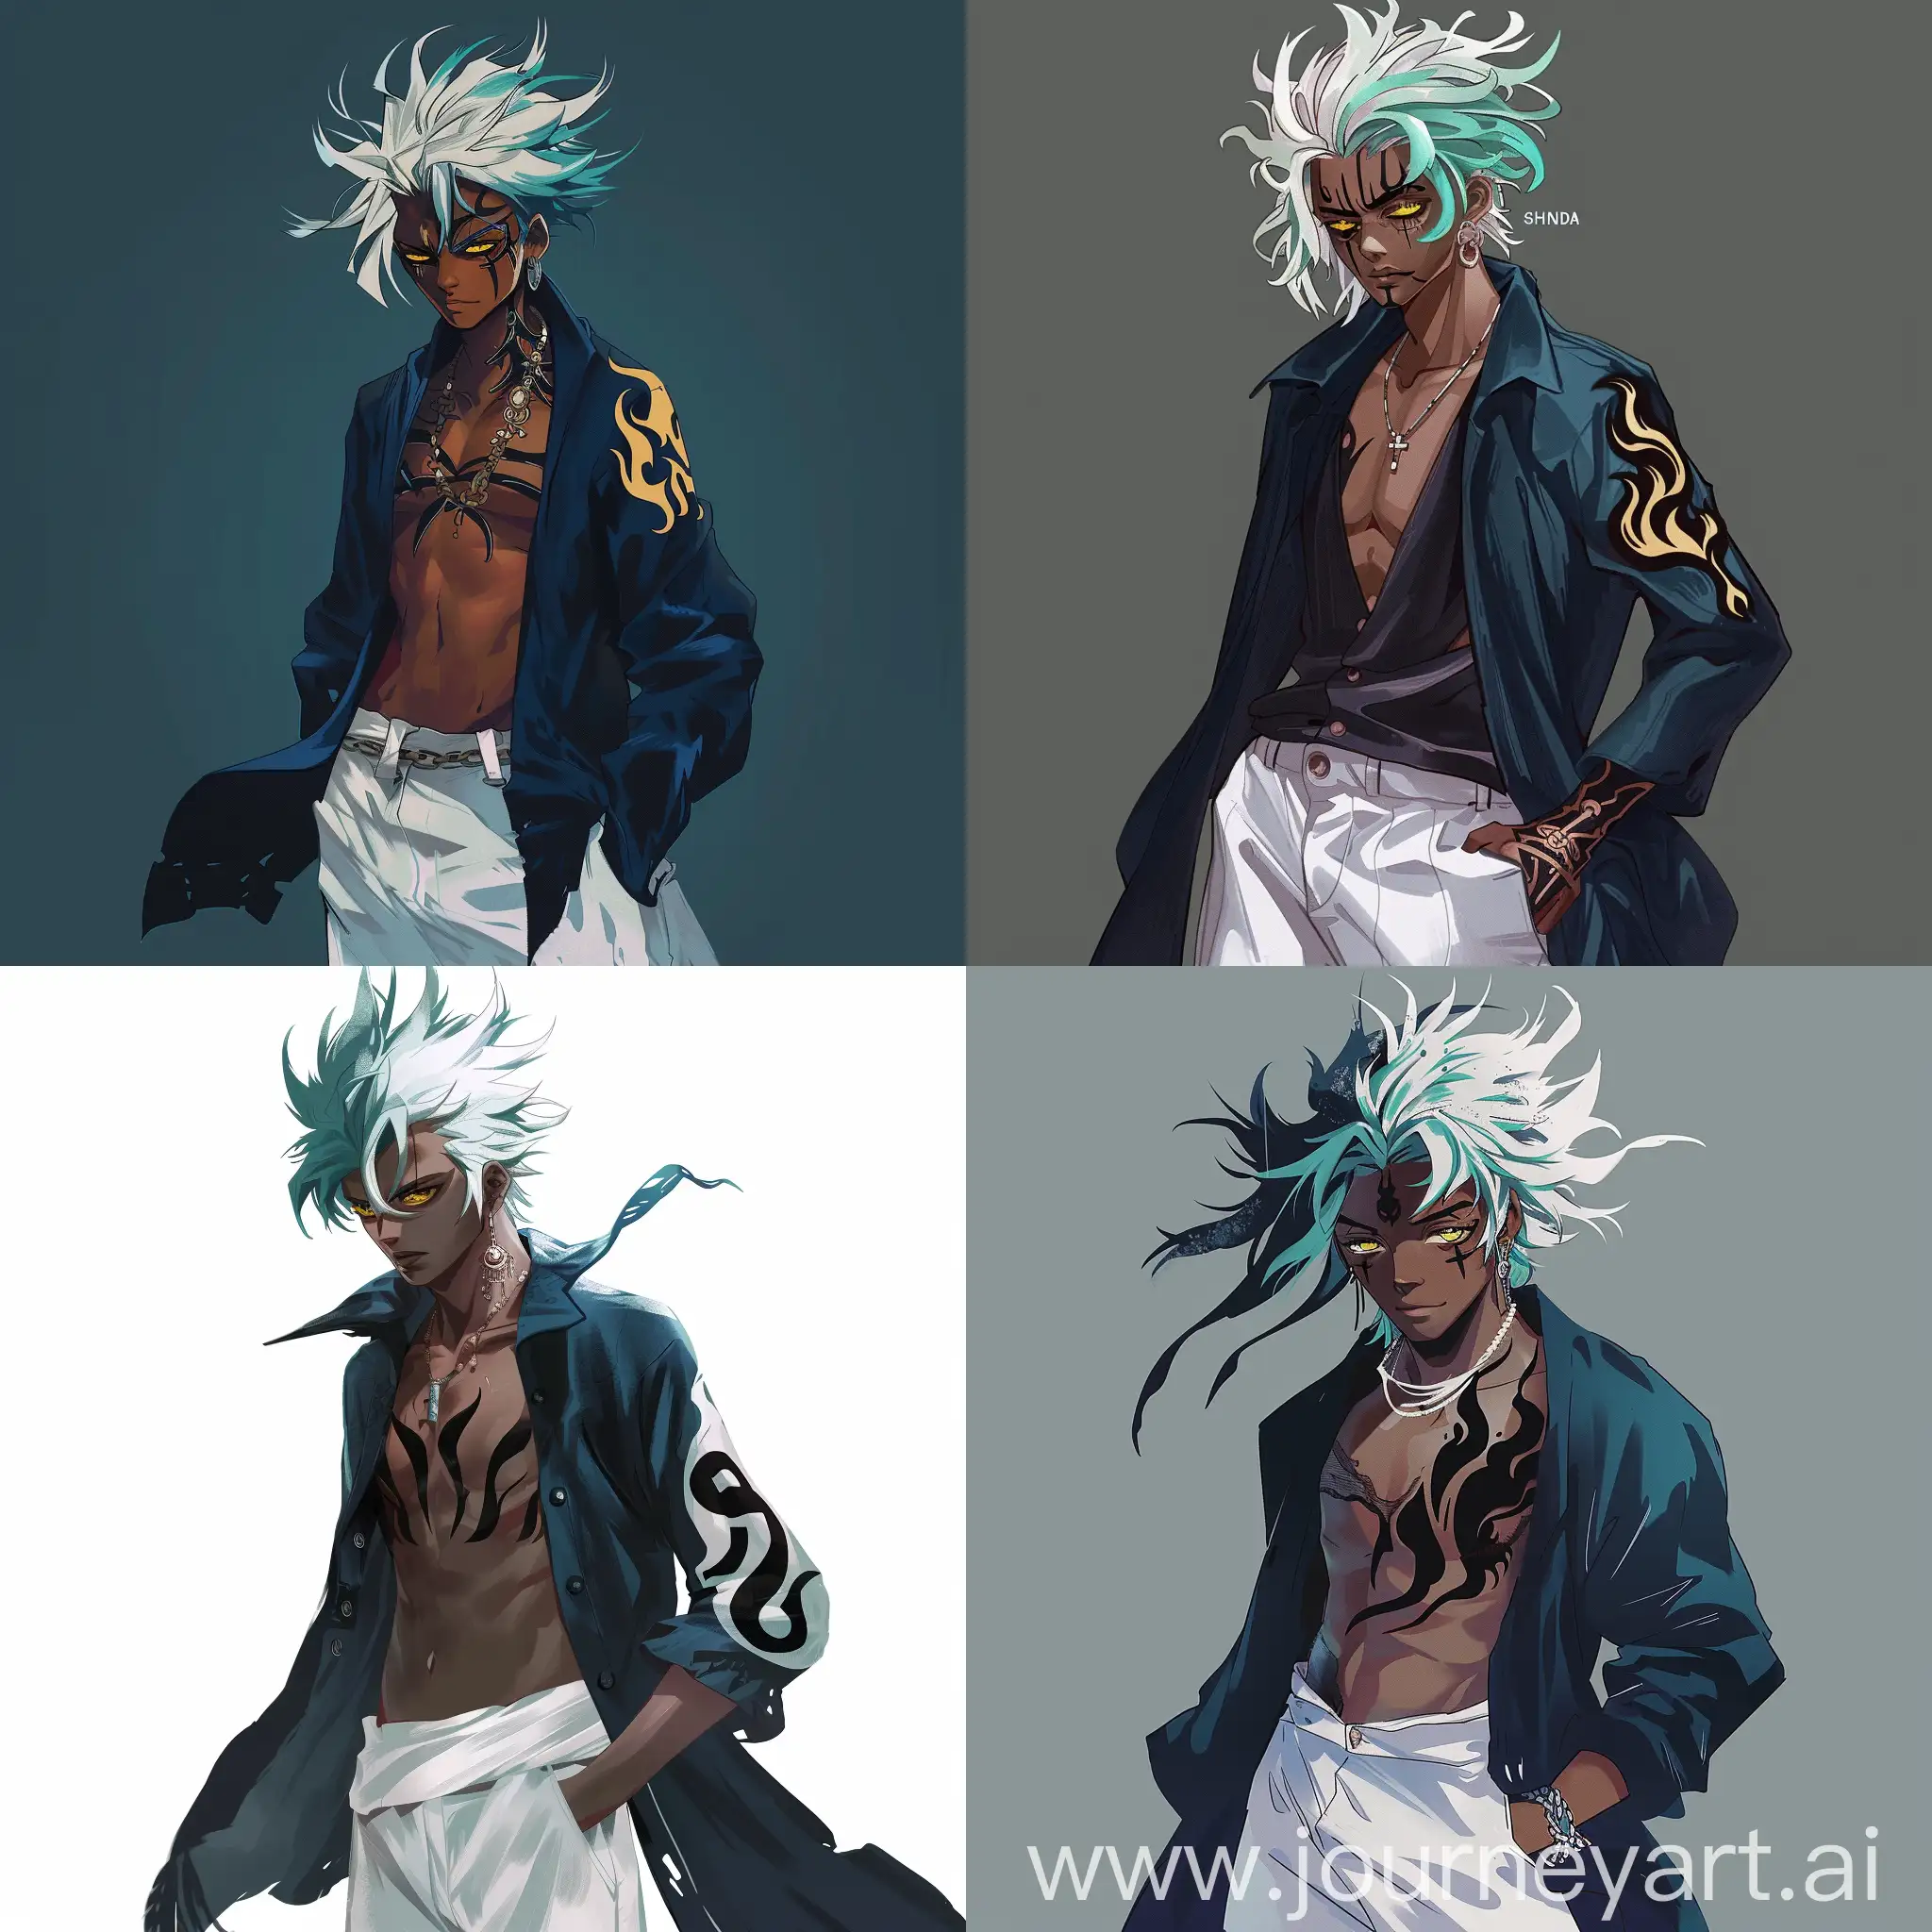 Elvis Tek, a 2.5-meter-tall Shandia youth with dark skin. Wild, spiky white hair tinted with cyan, a few strands framing his forehead and a single lock standing upright. A black tribal flame tattoo covers his right side. His left eye is yellow, his right scarred and missing. Dark blue cardigan left open, revealing his chest. White baggy pants. Anime, One Piece inspired. Dynamic pose, conveying confidence and strength.